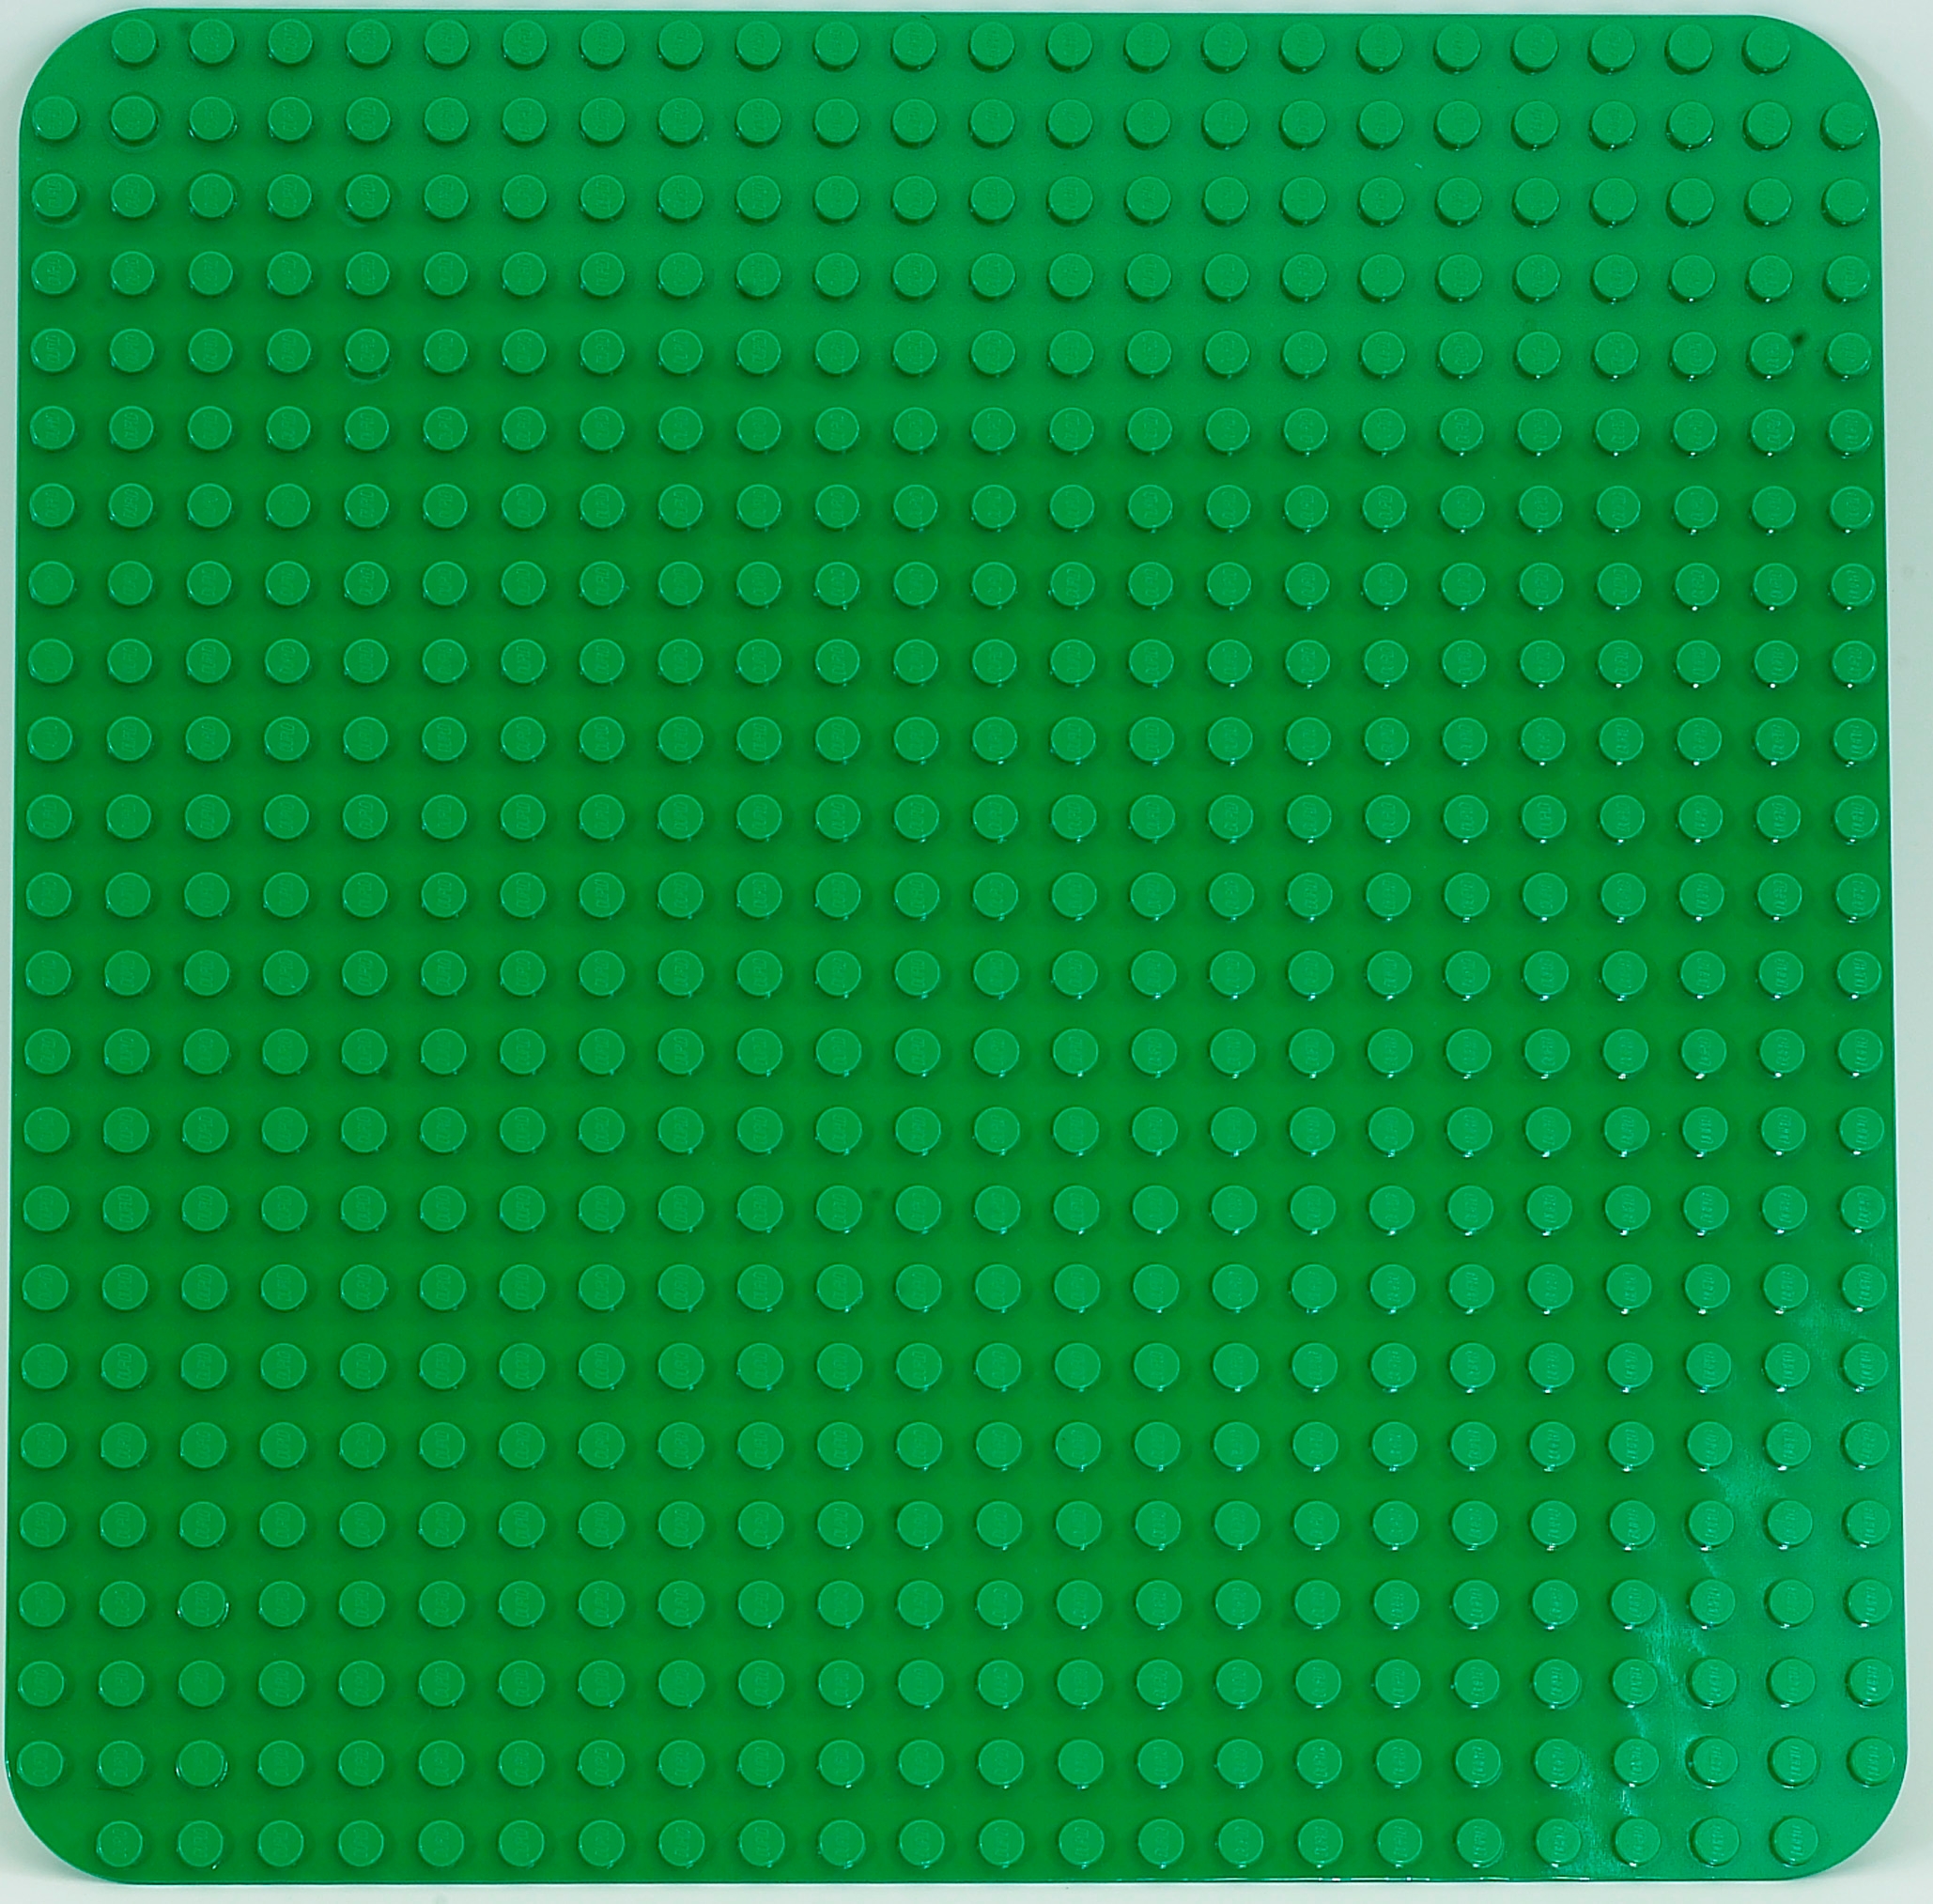 Pins  38 x 38 cm Lego Duplo Large Green Base Board Plate 24 x 24 Studs